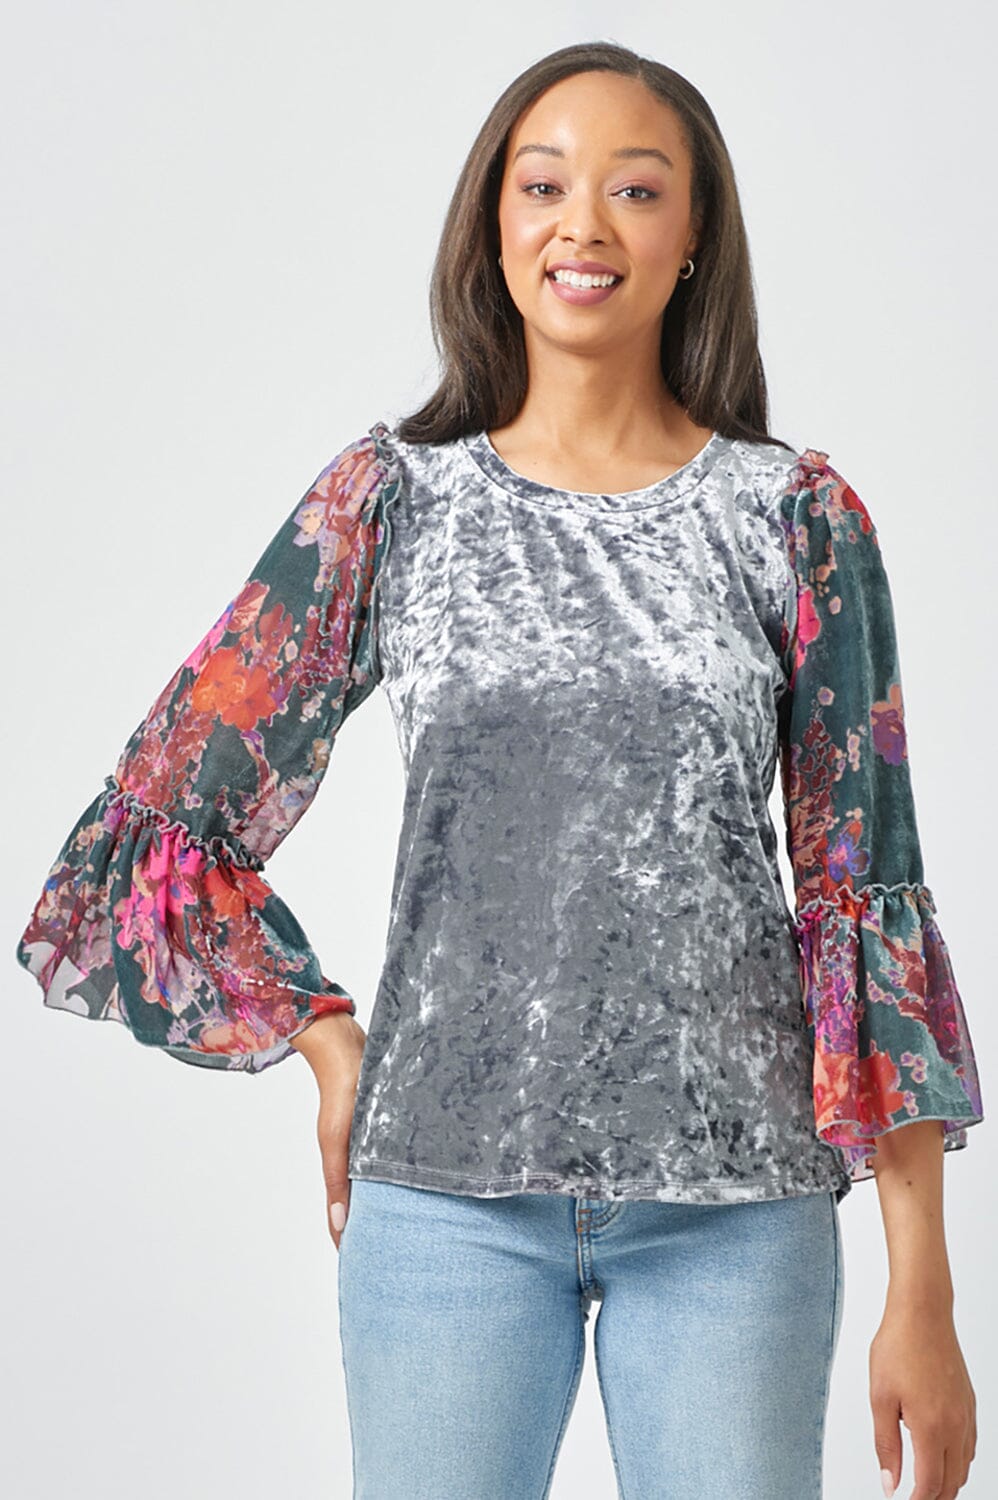 CONTRAST FLORAL SHEER SLEEVE GREY VELOUR TOP Top FashionWear Collection S Grey/Multi 